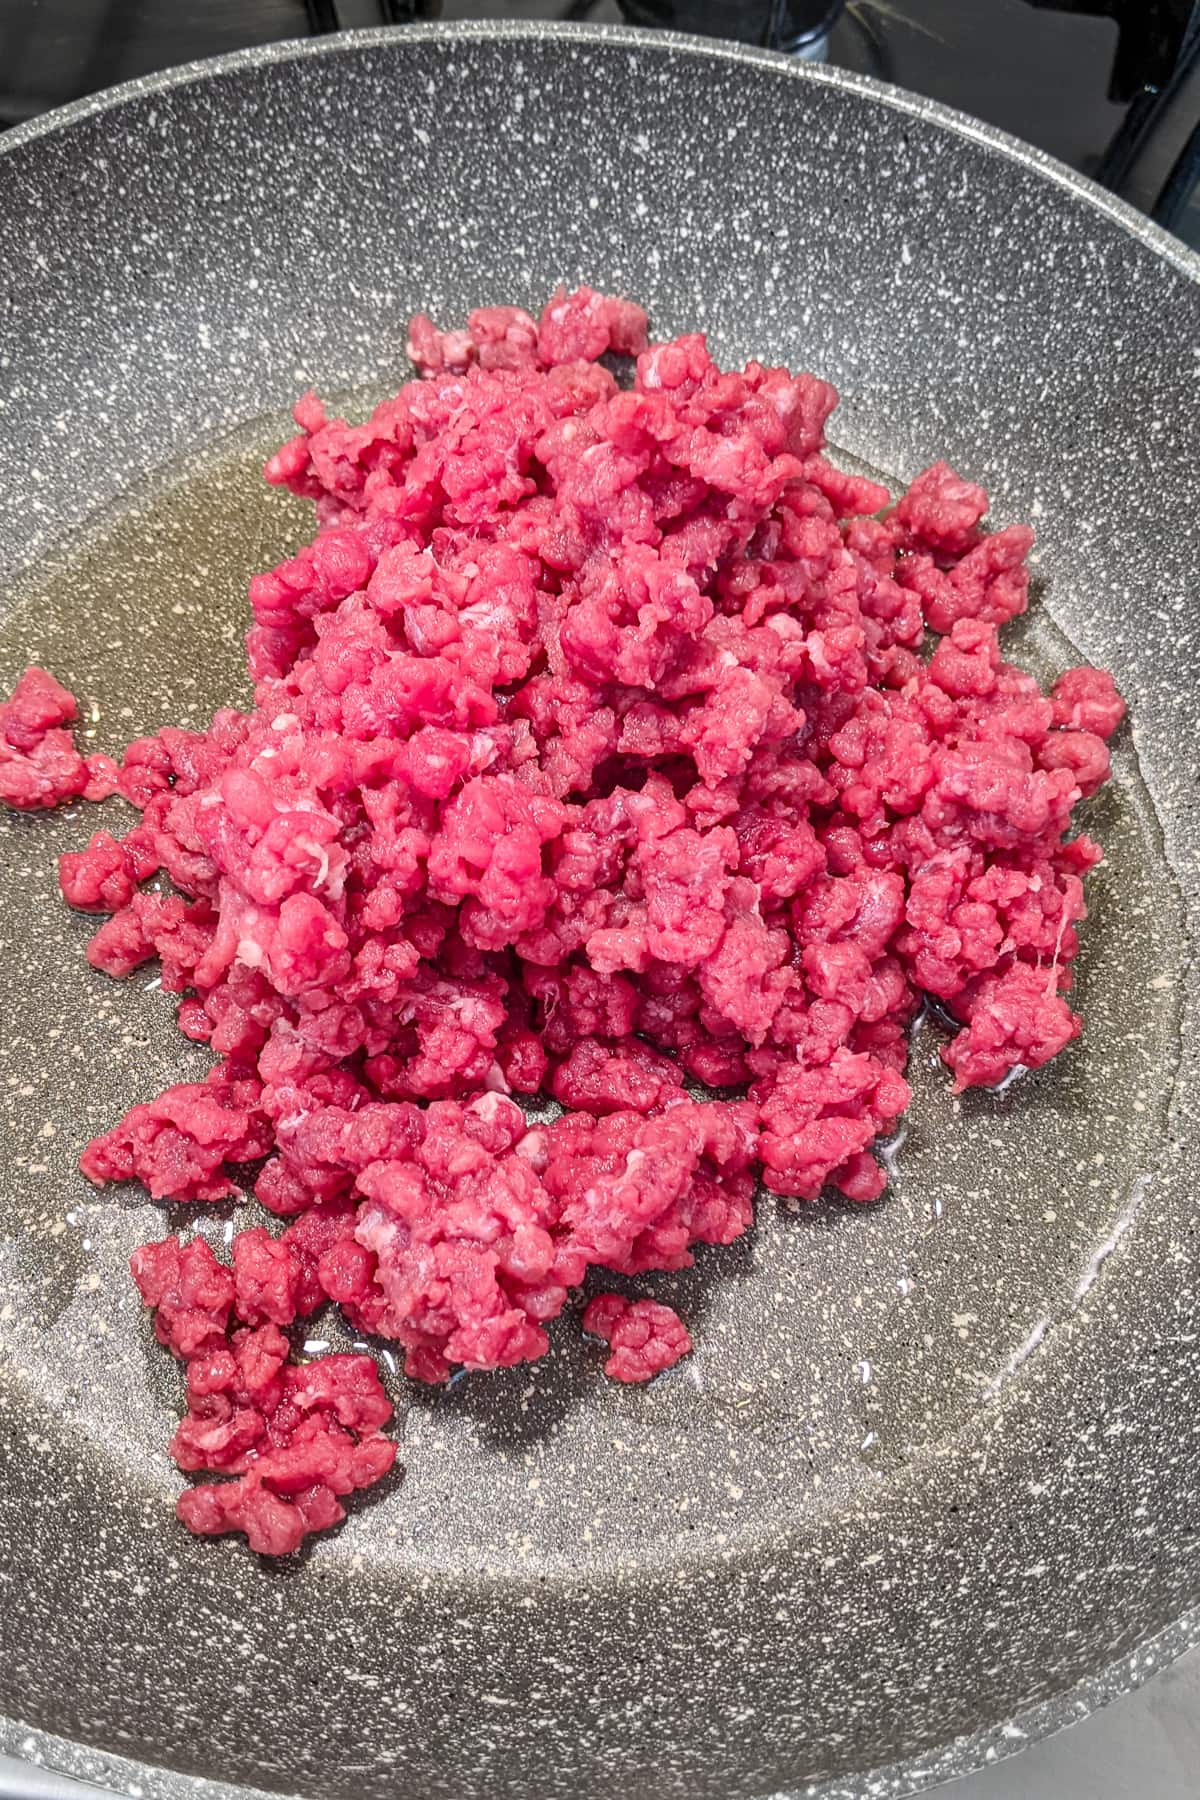 Ground beef with oil in a frying pan.